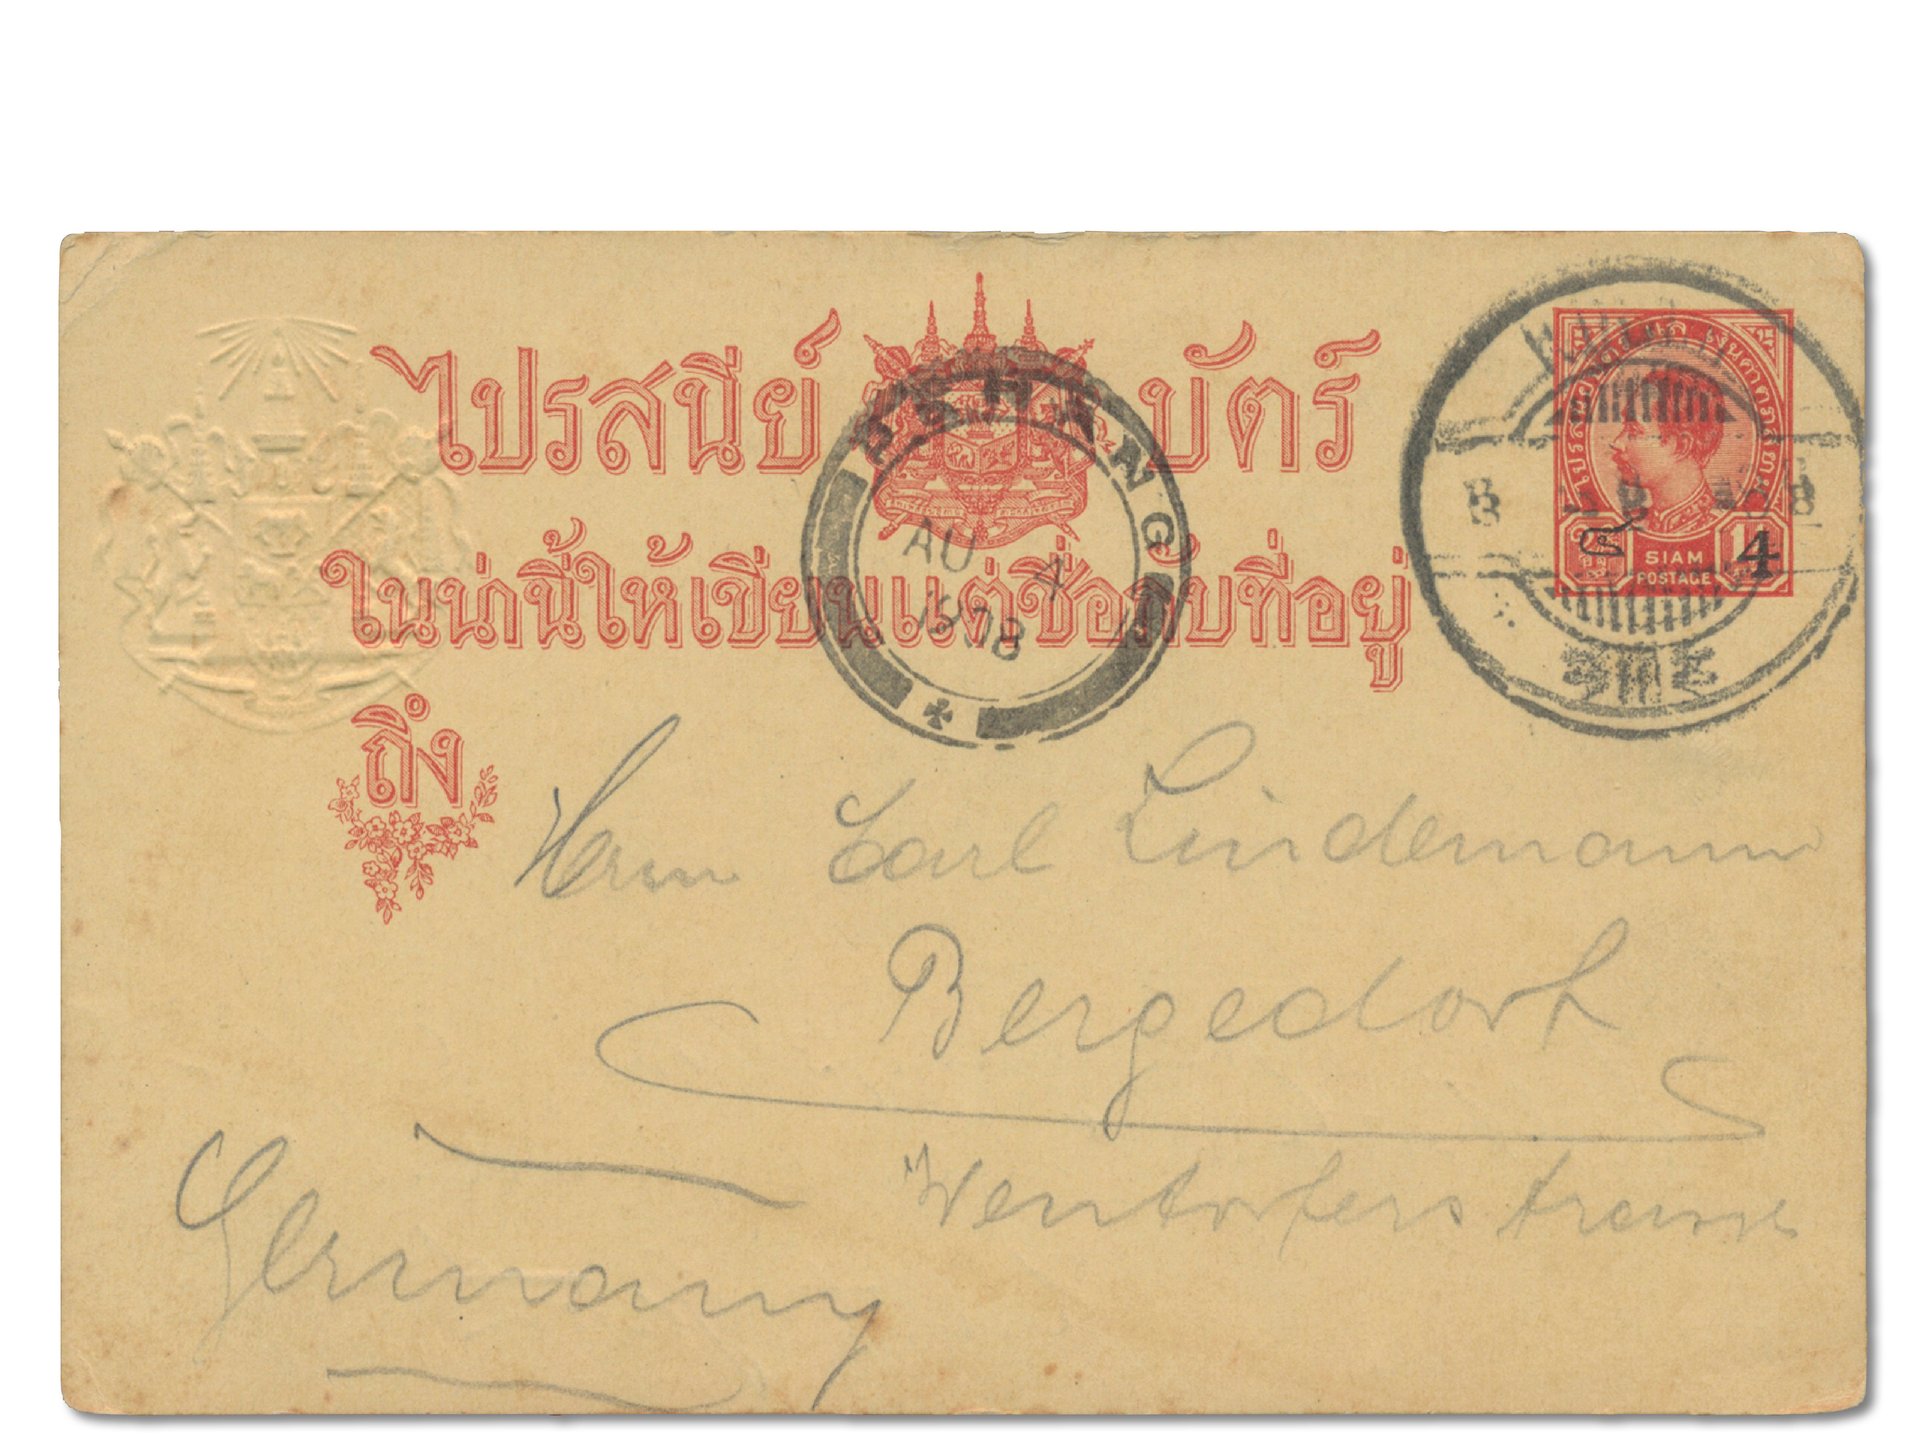 Postal stationery card with the first complete postmark from the Royal Siamese Post Office in Kulim